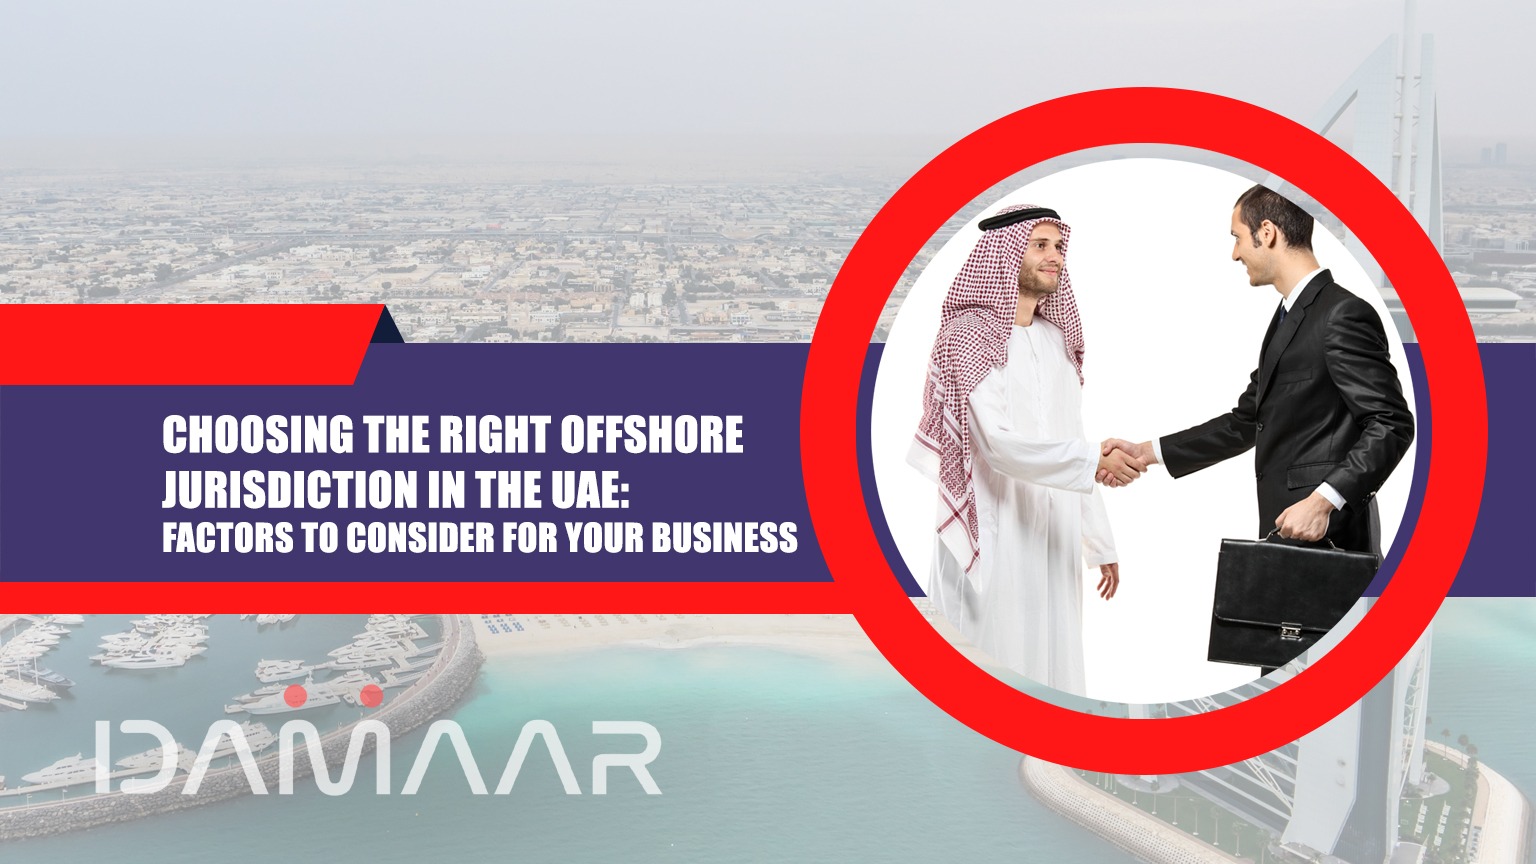 You are currently viewing Choosing the Right Offshore Jurisdiction in the UAE: Factors to Consider for Your Business